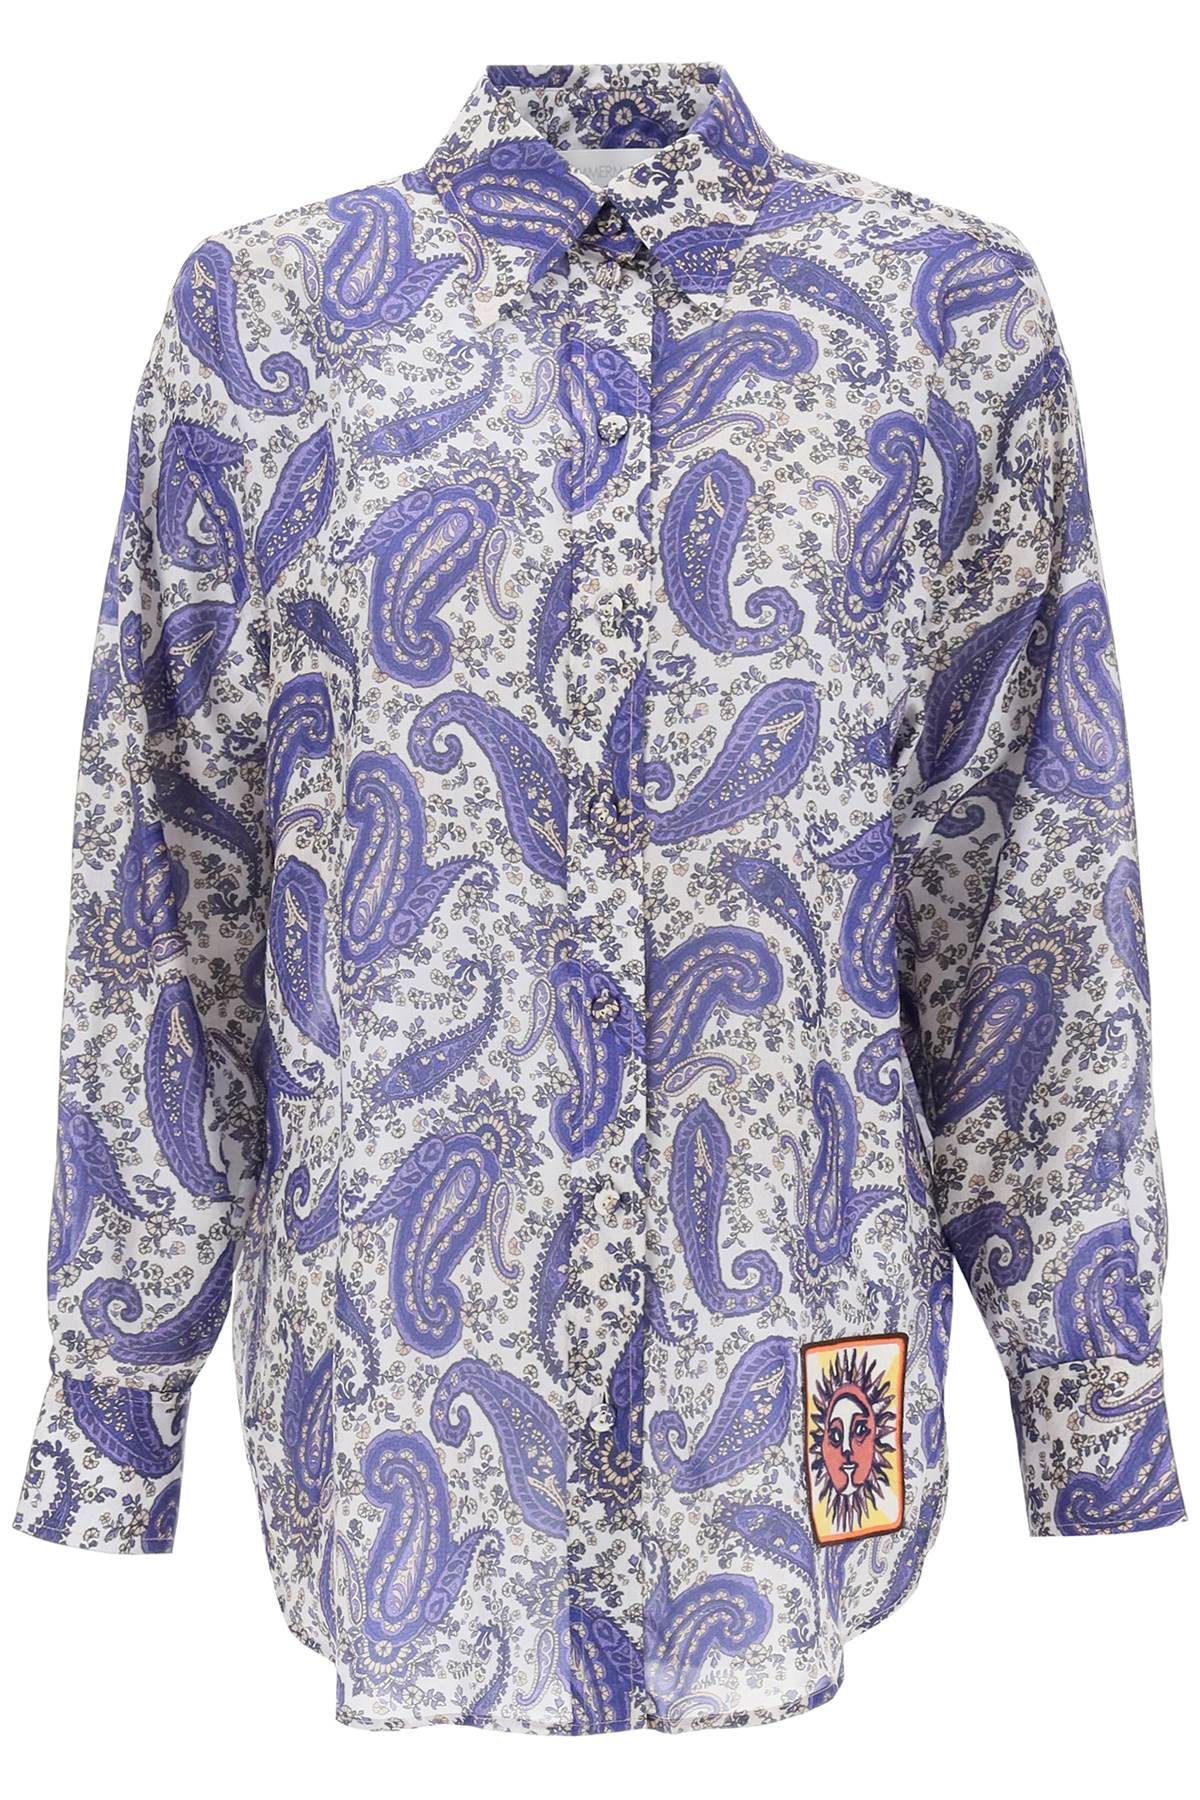 ZIMMERMANN Multicolor Paisley Print Silk Shirt for Women - FW23 Collection